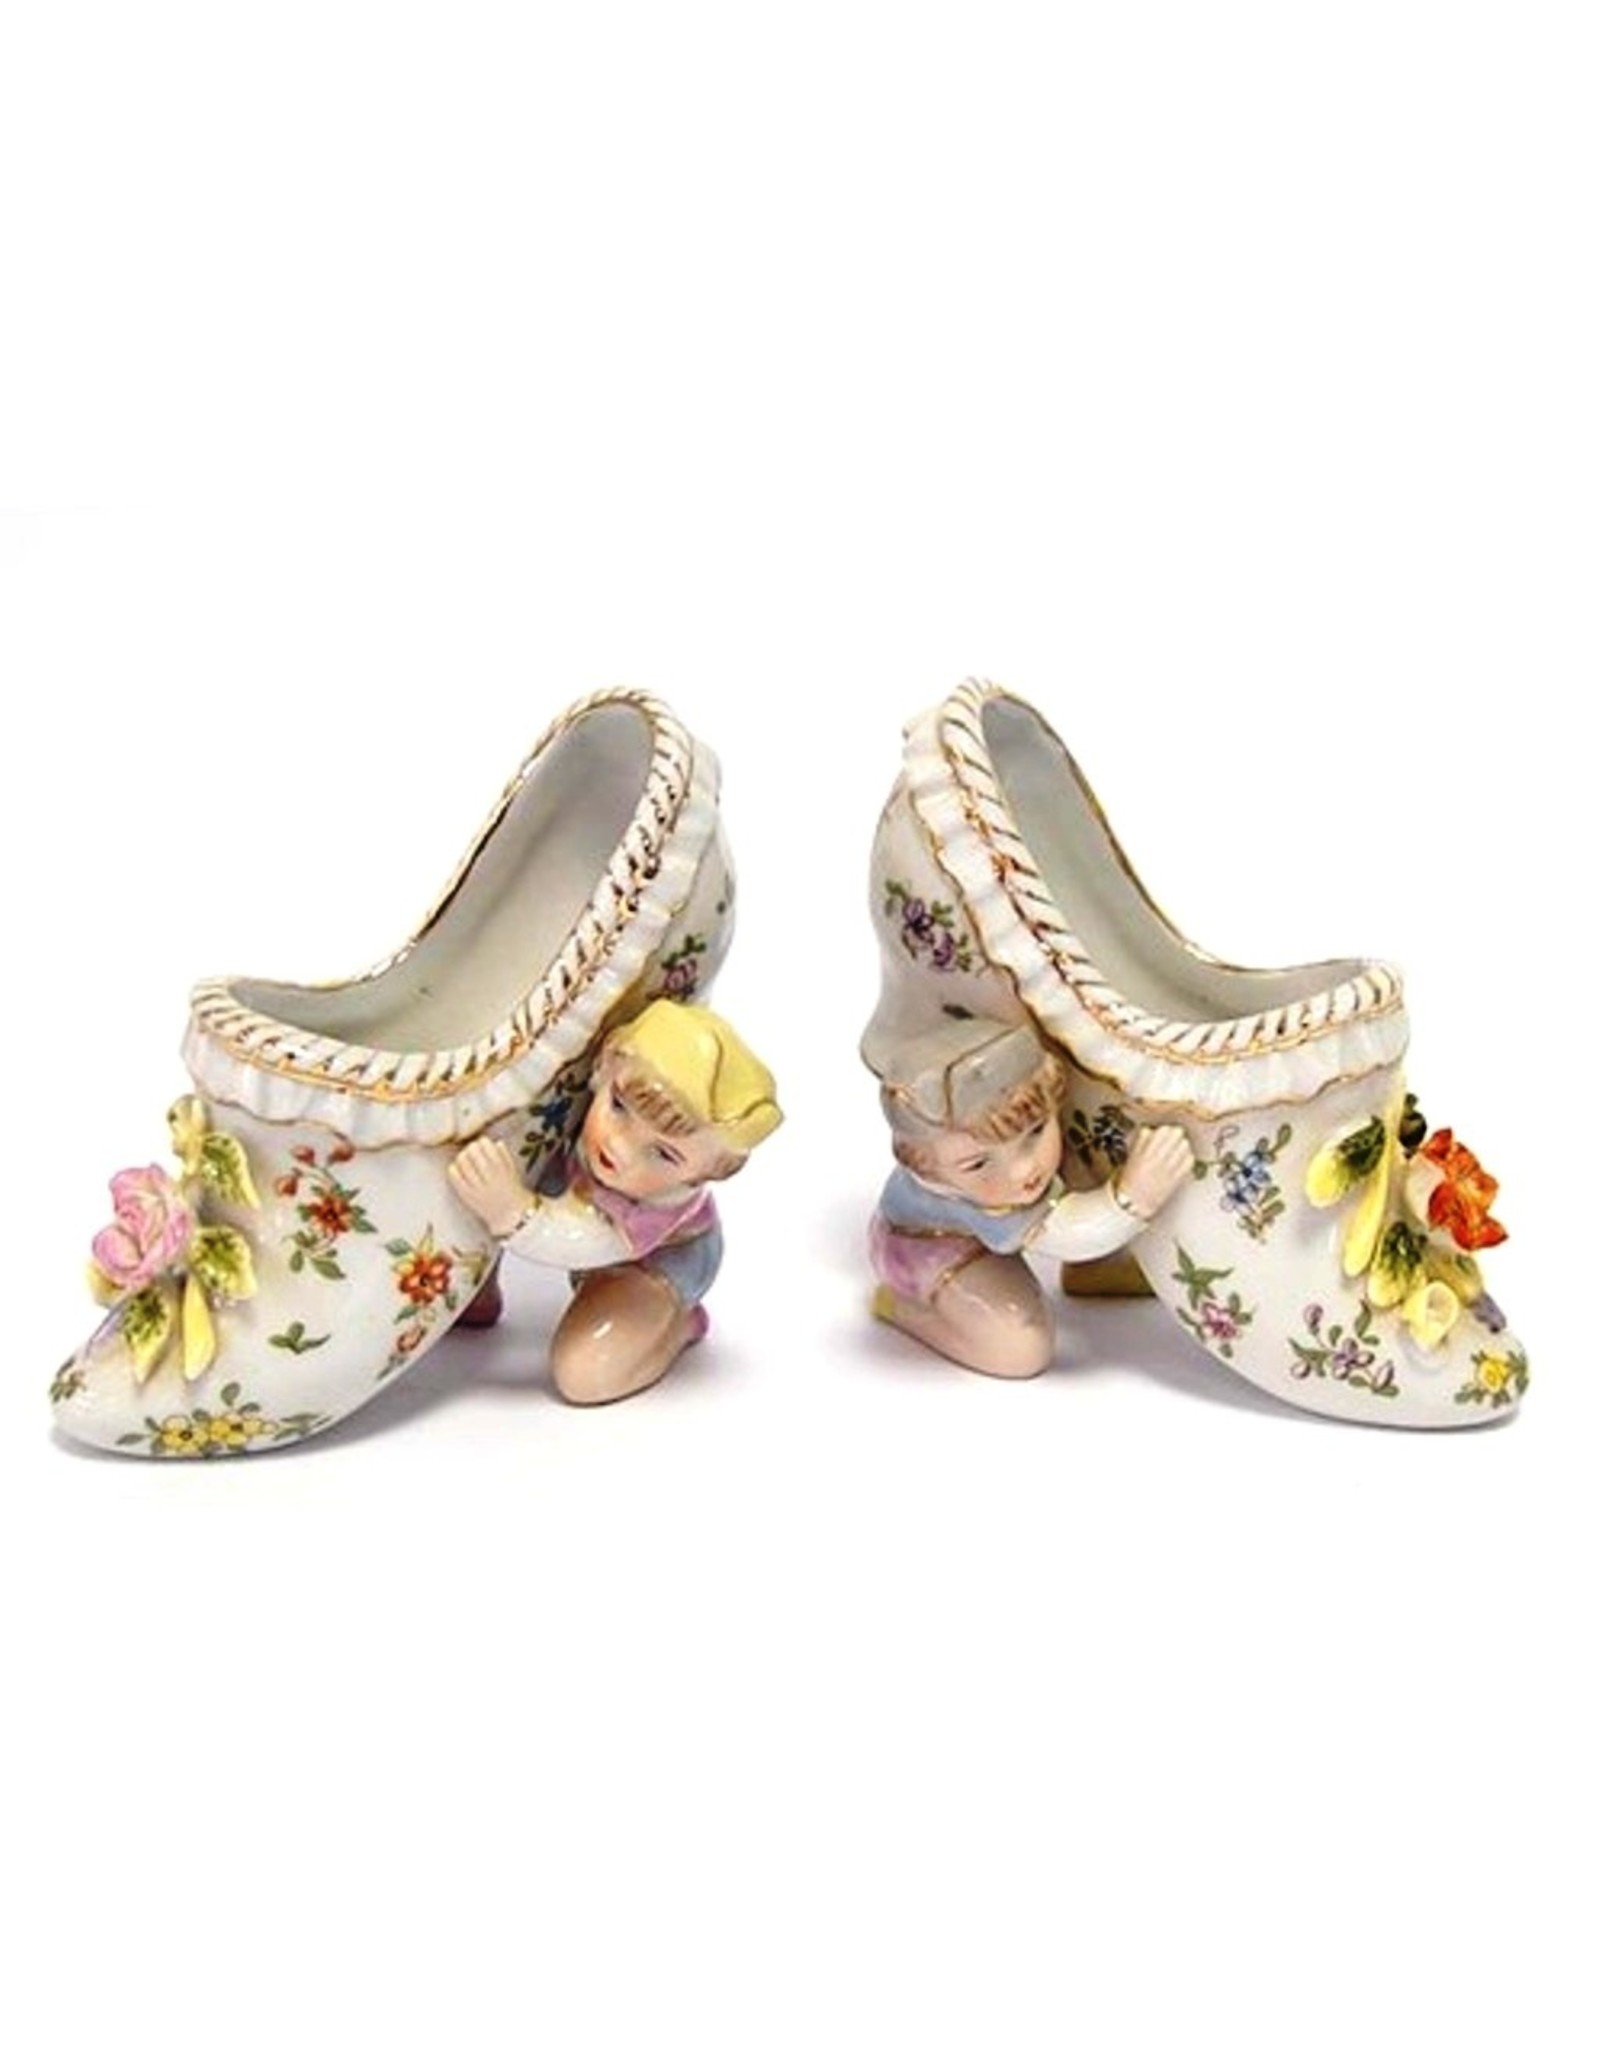 Trukado Miscellaneous - A pair of porcelain Rococo style Mules